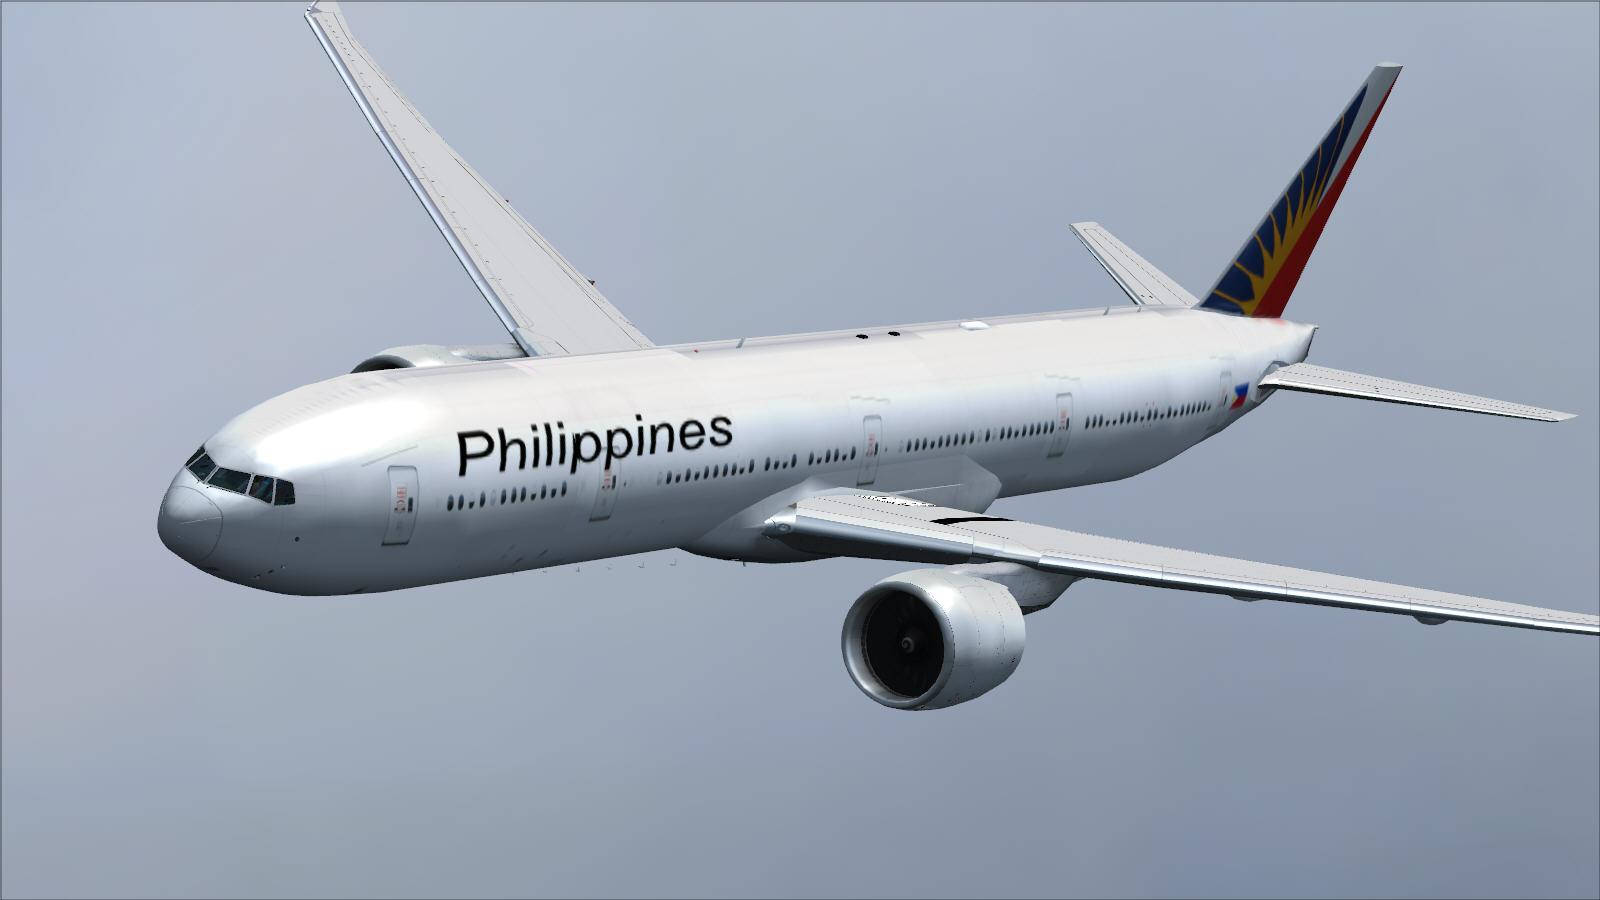 Philippine Airlines White Large Flying Airplane Wallpaper